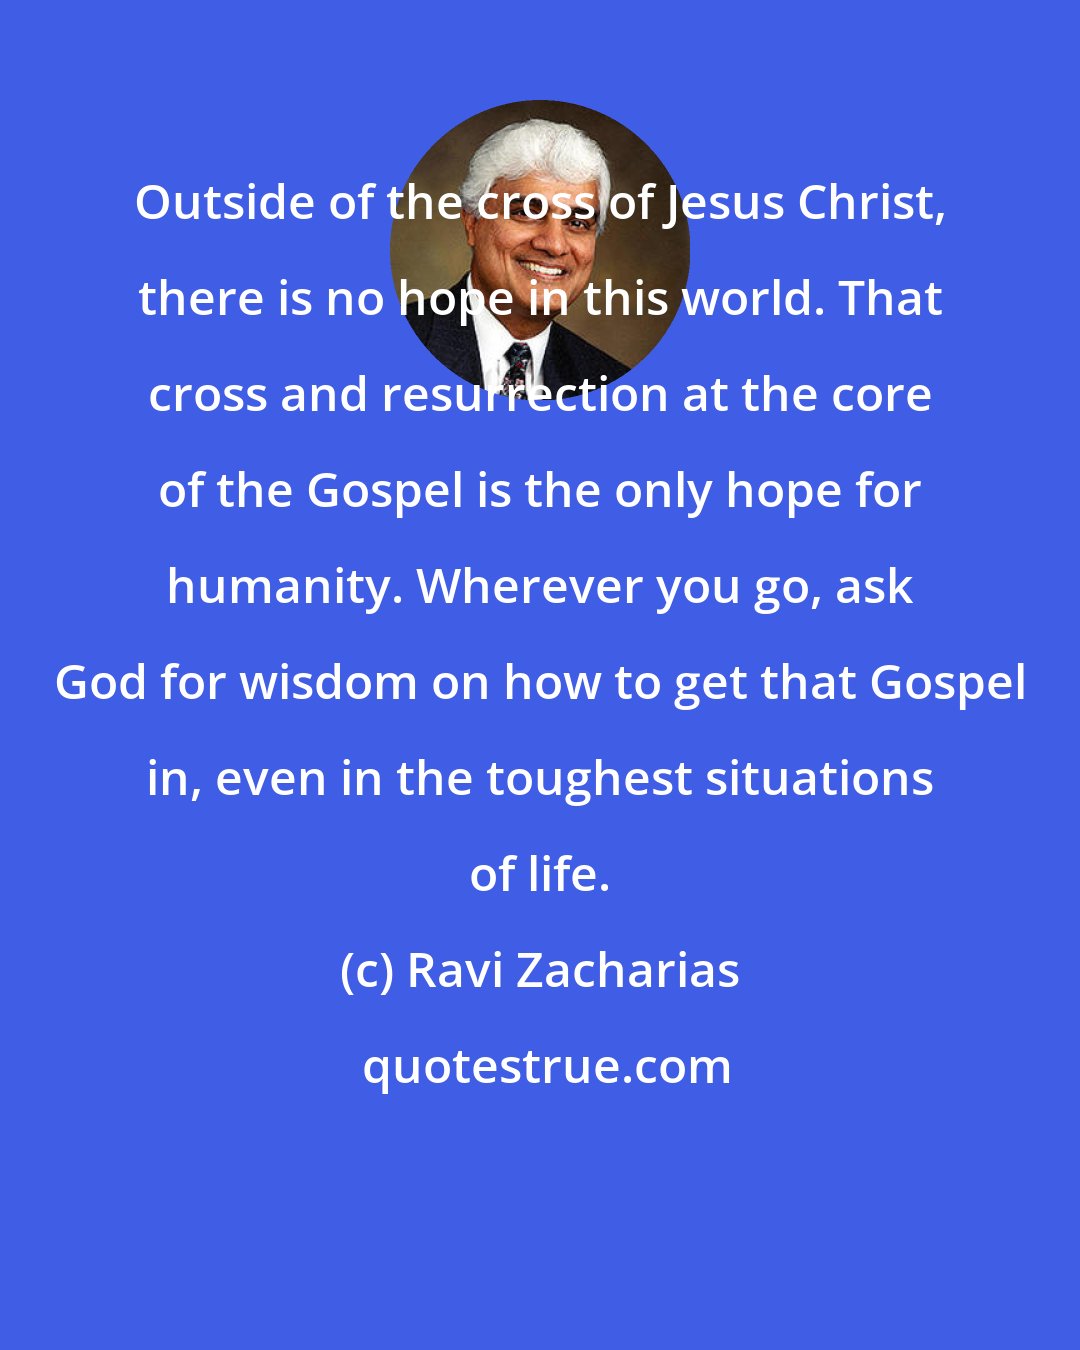 Ravi Zacharias: Outside of the cross of Jesus Christ, there is no hope in this world. That cross and resurrection at the core of the Gospel is the only hope for humanity. Wherever you go, ask God for wisdom on how to get that Gospel in, even in the toughest situations of life.